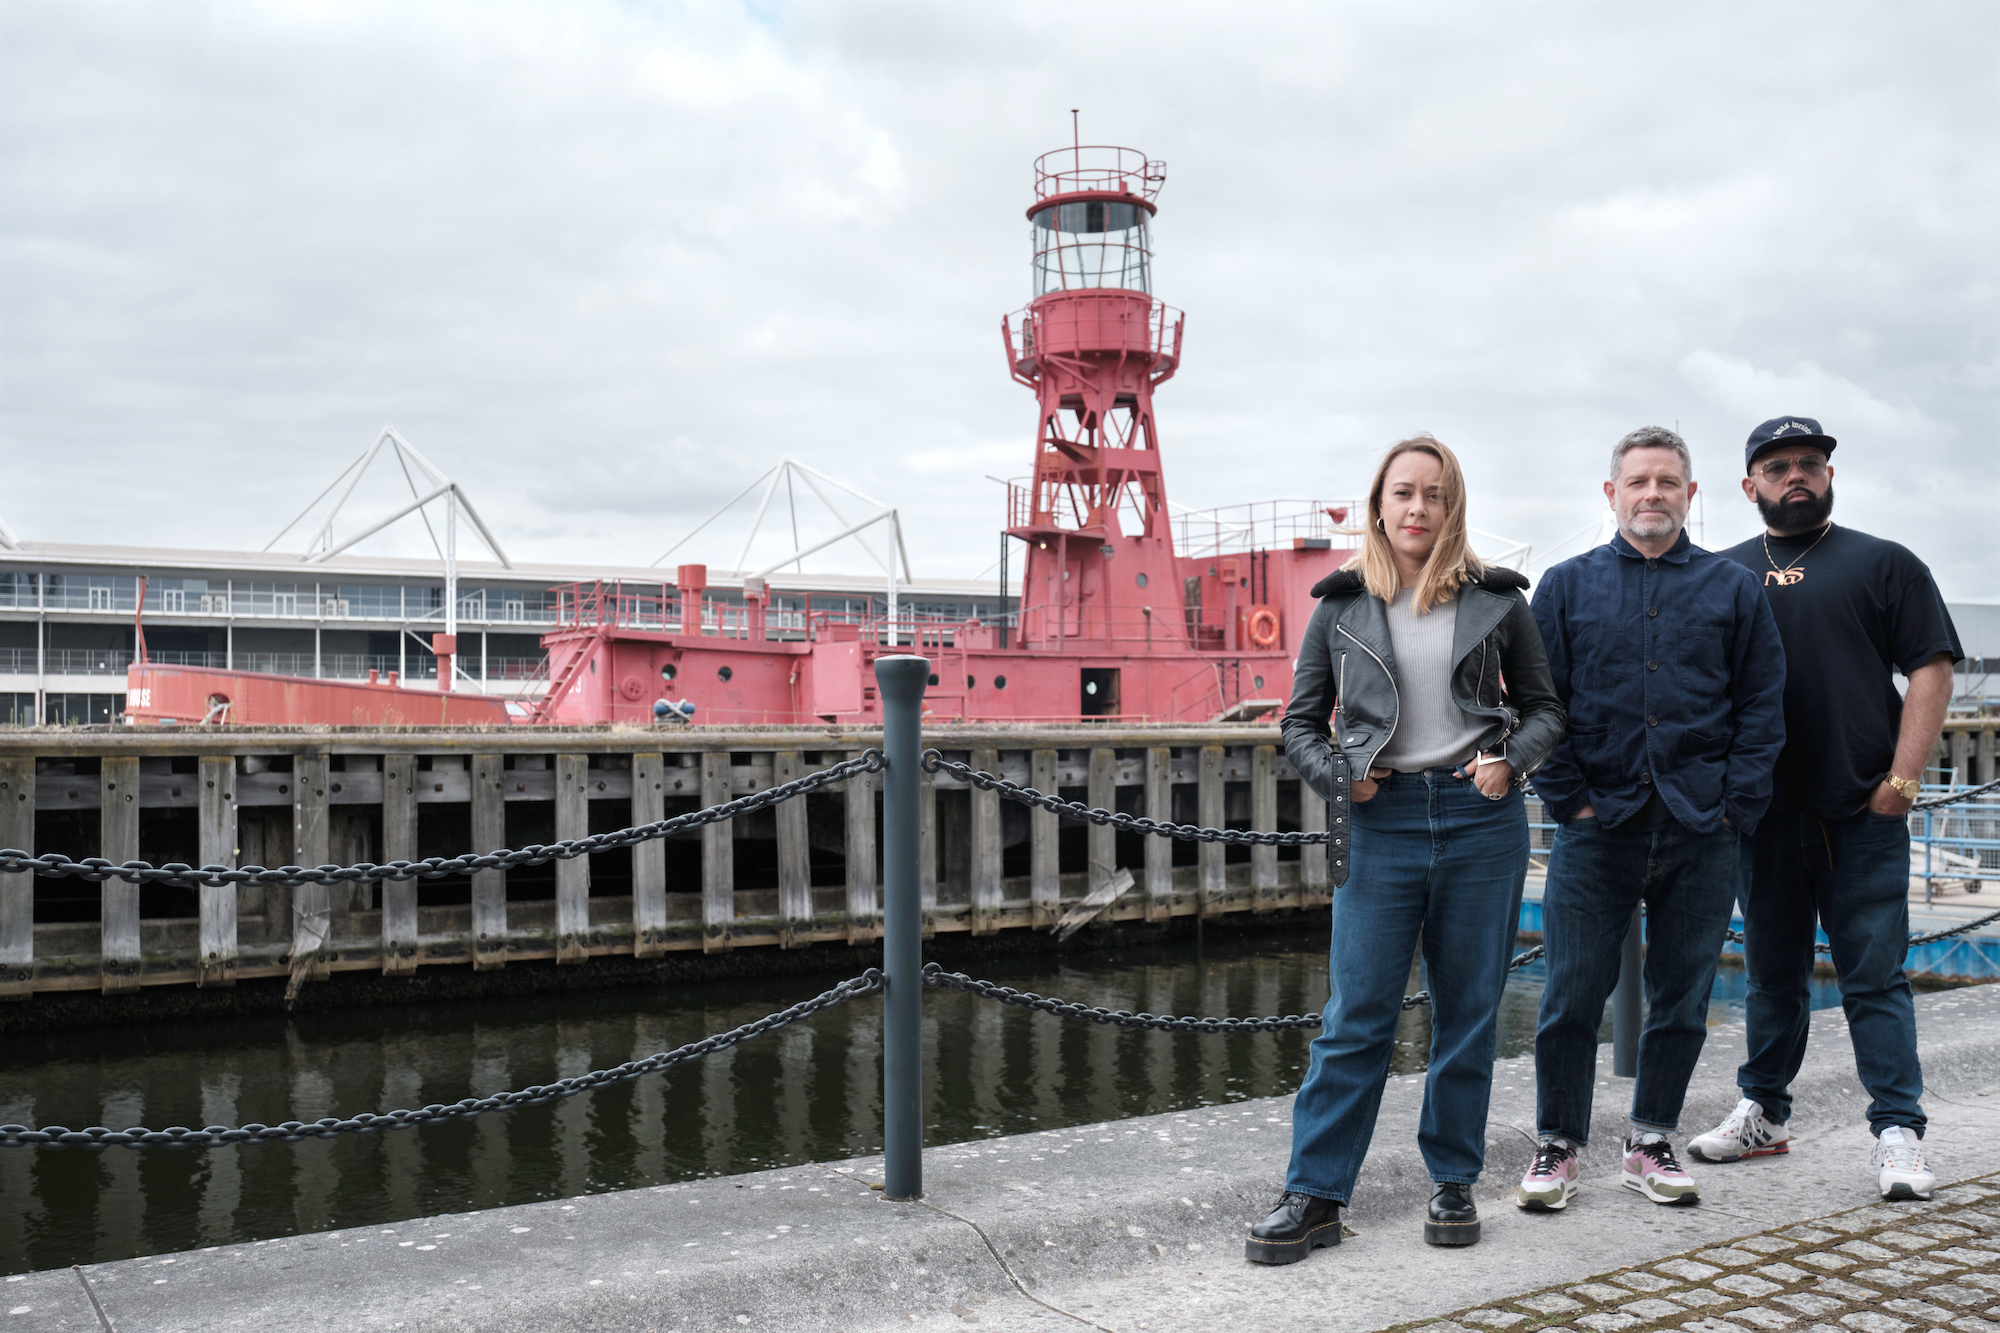 The ARRIVAL team outside Lightship 93, a historic lighthouse vessel in the Royal Docks